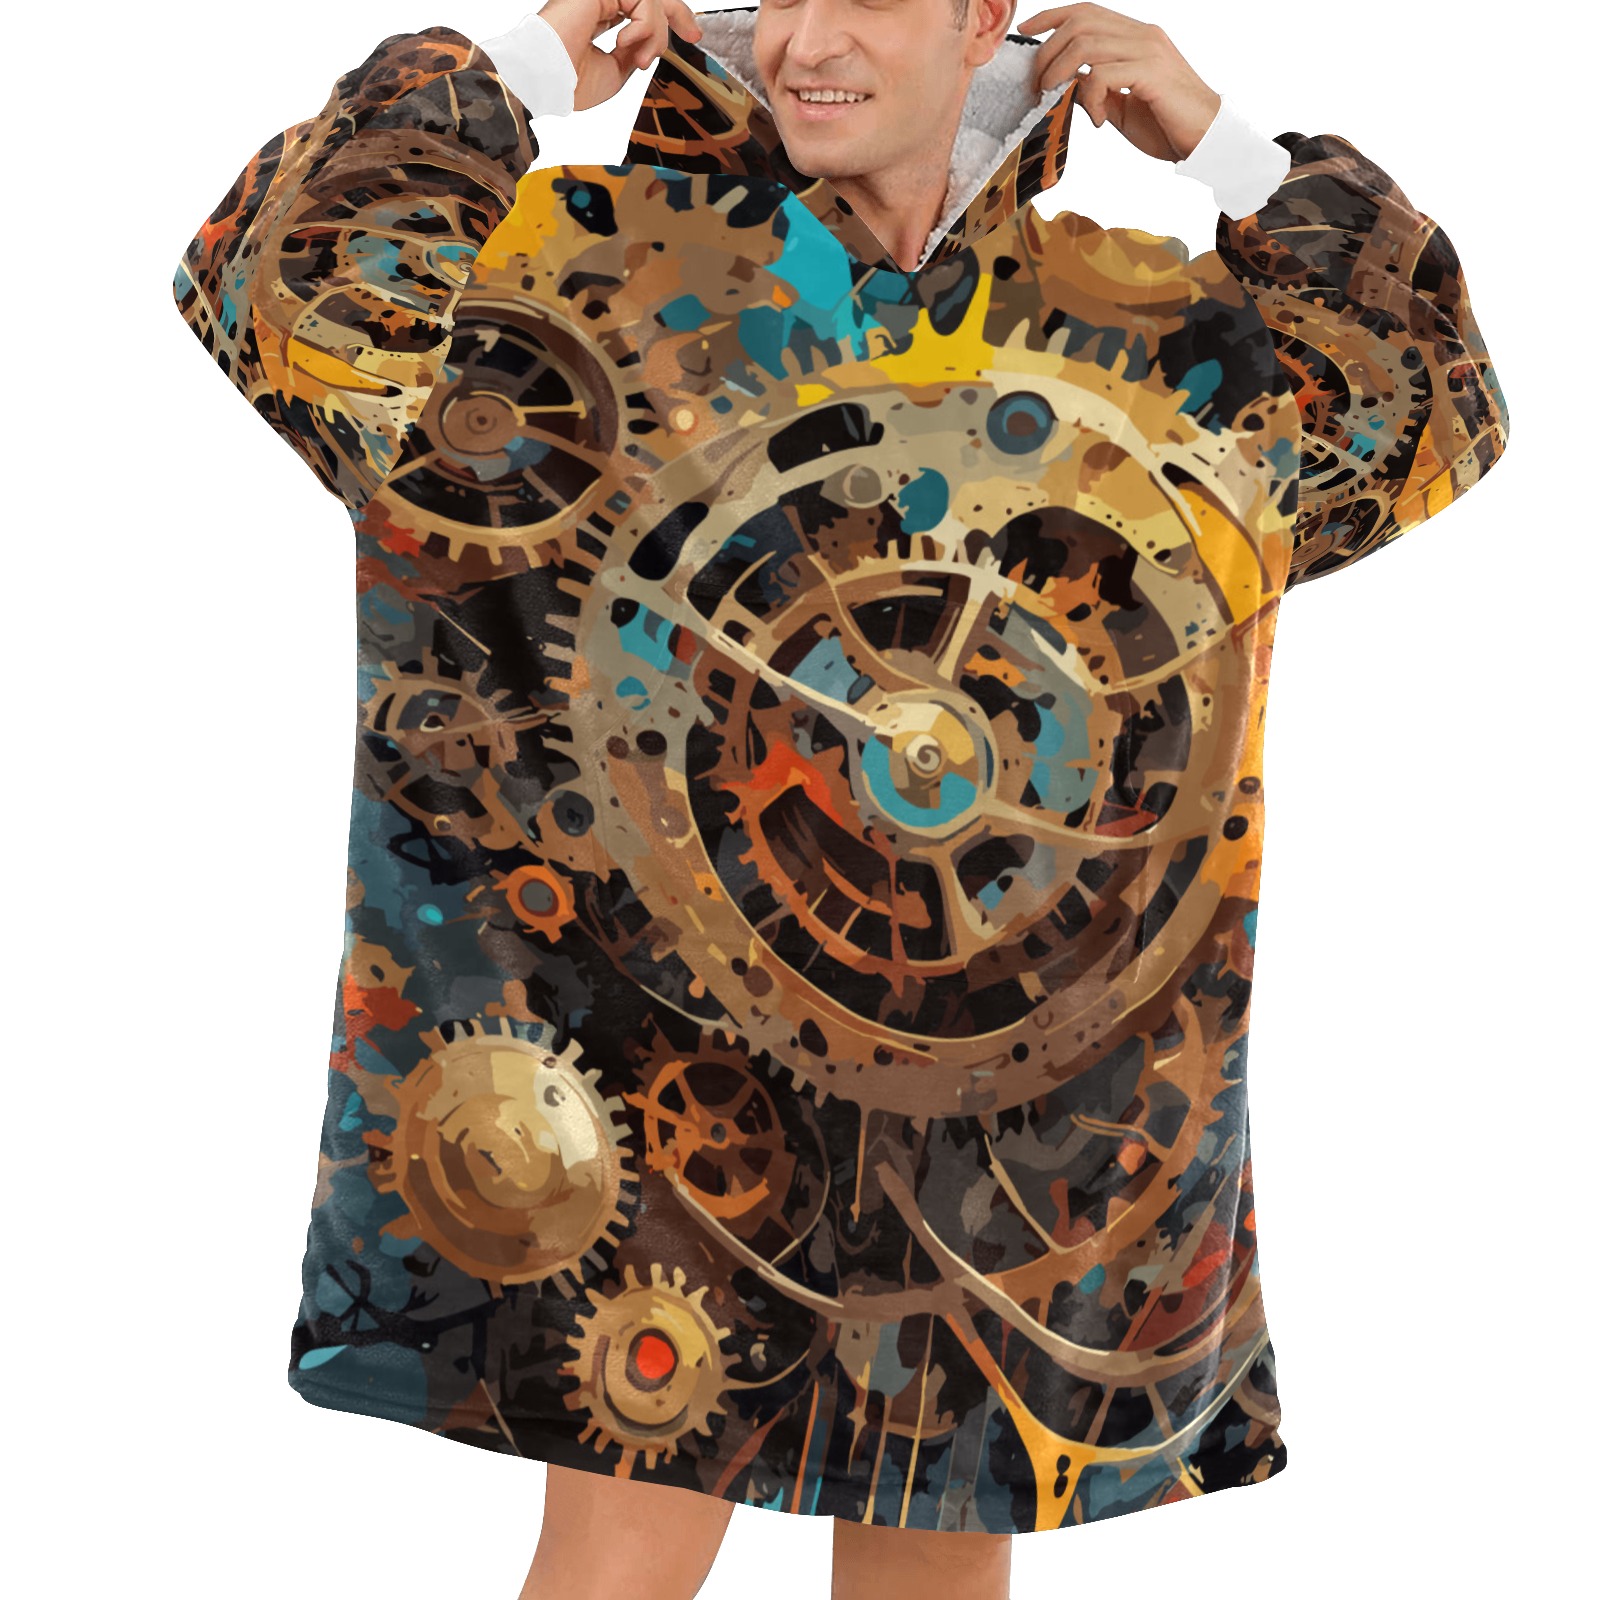 Retro Mechanical Gear Trendy Colorful Abstract Art Blanket Hoodie for Men